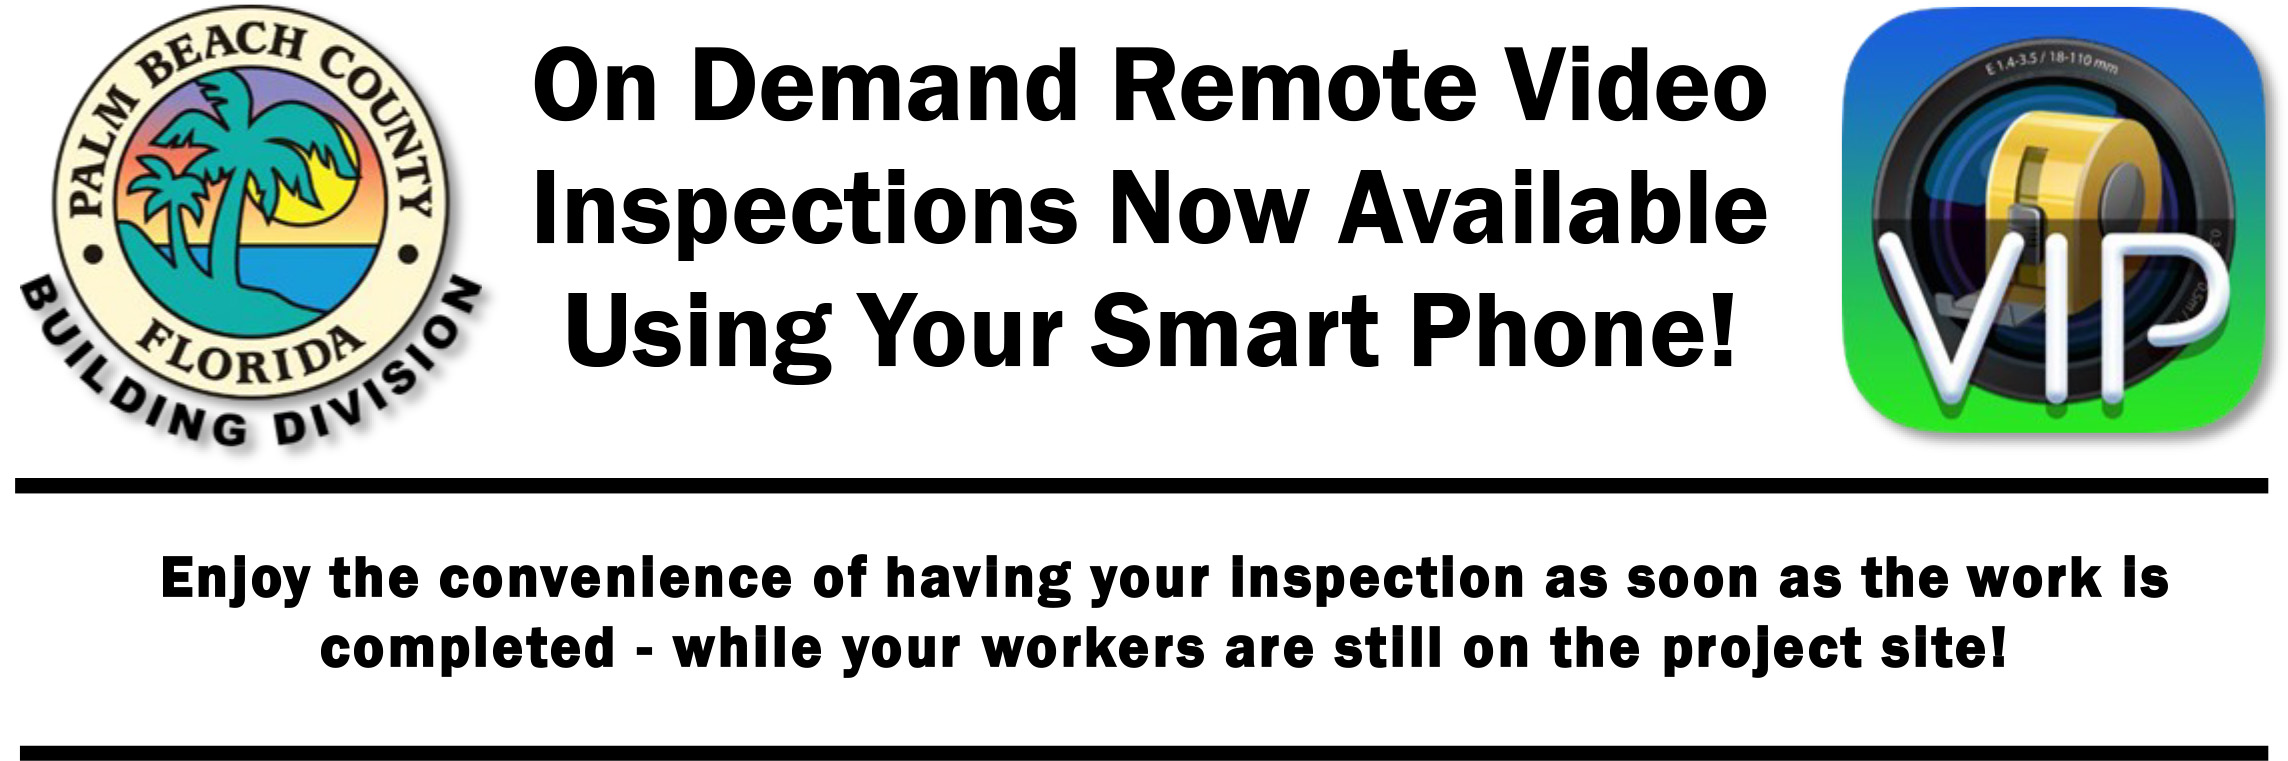 On Demand Remote Video Inspections Now Available Using Your Smart Phone! Enjoy the convenience of having your inspection as soon as the work is completed - while your workers are still on the project site! Click for more details.